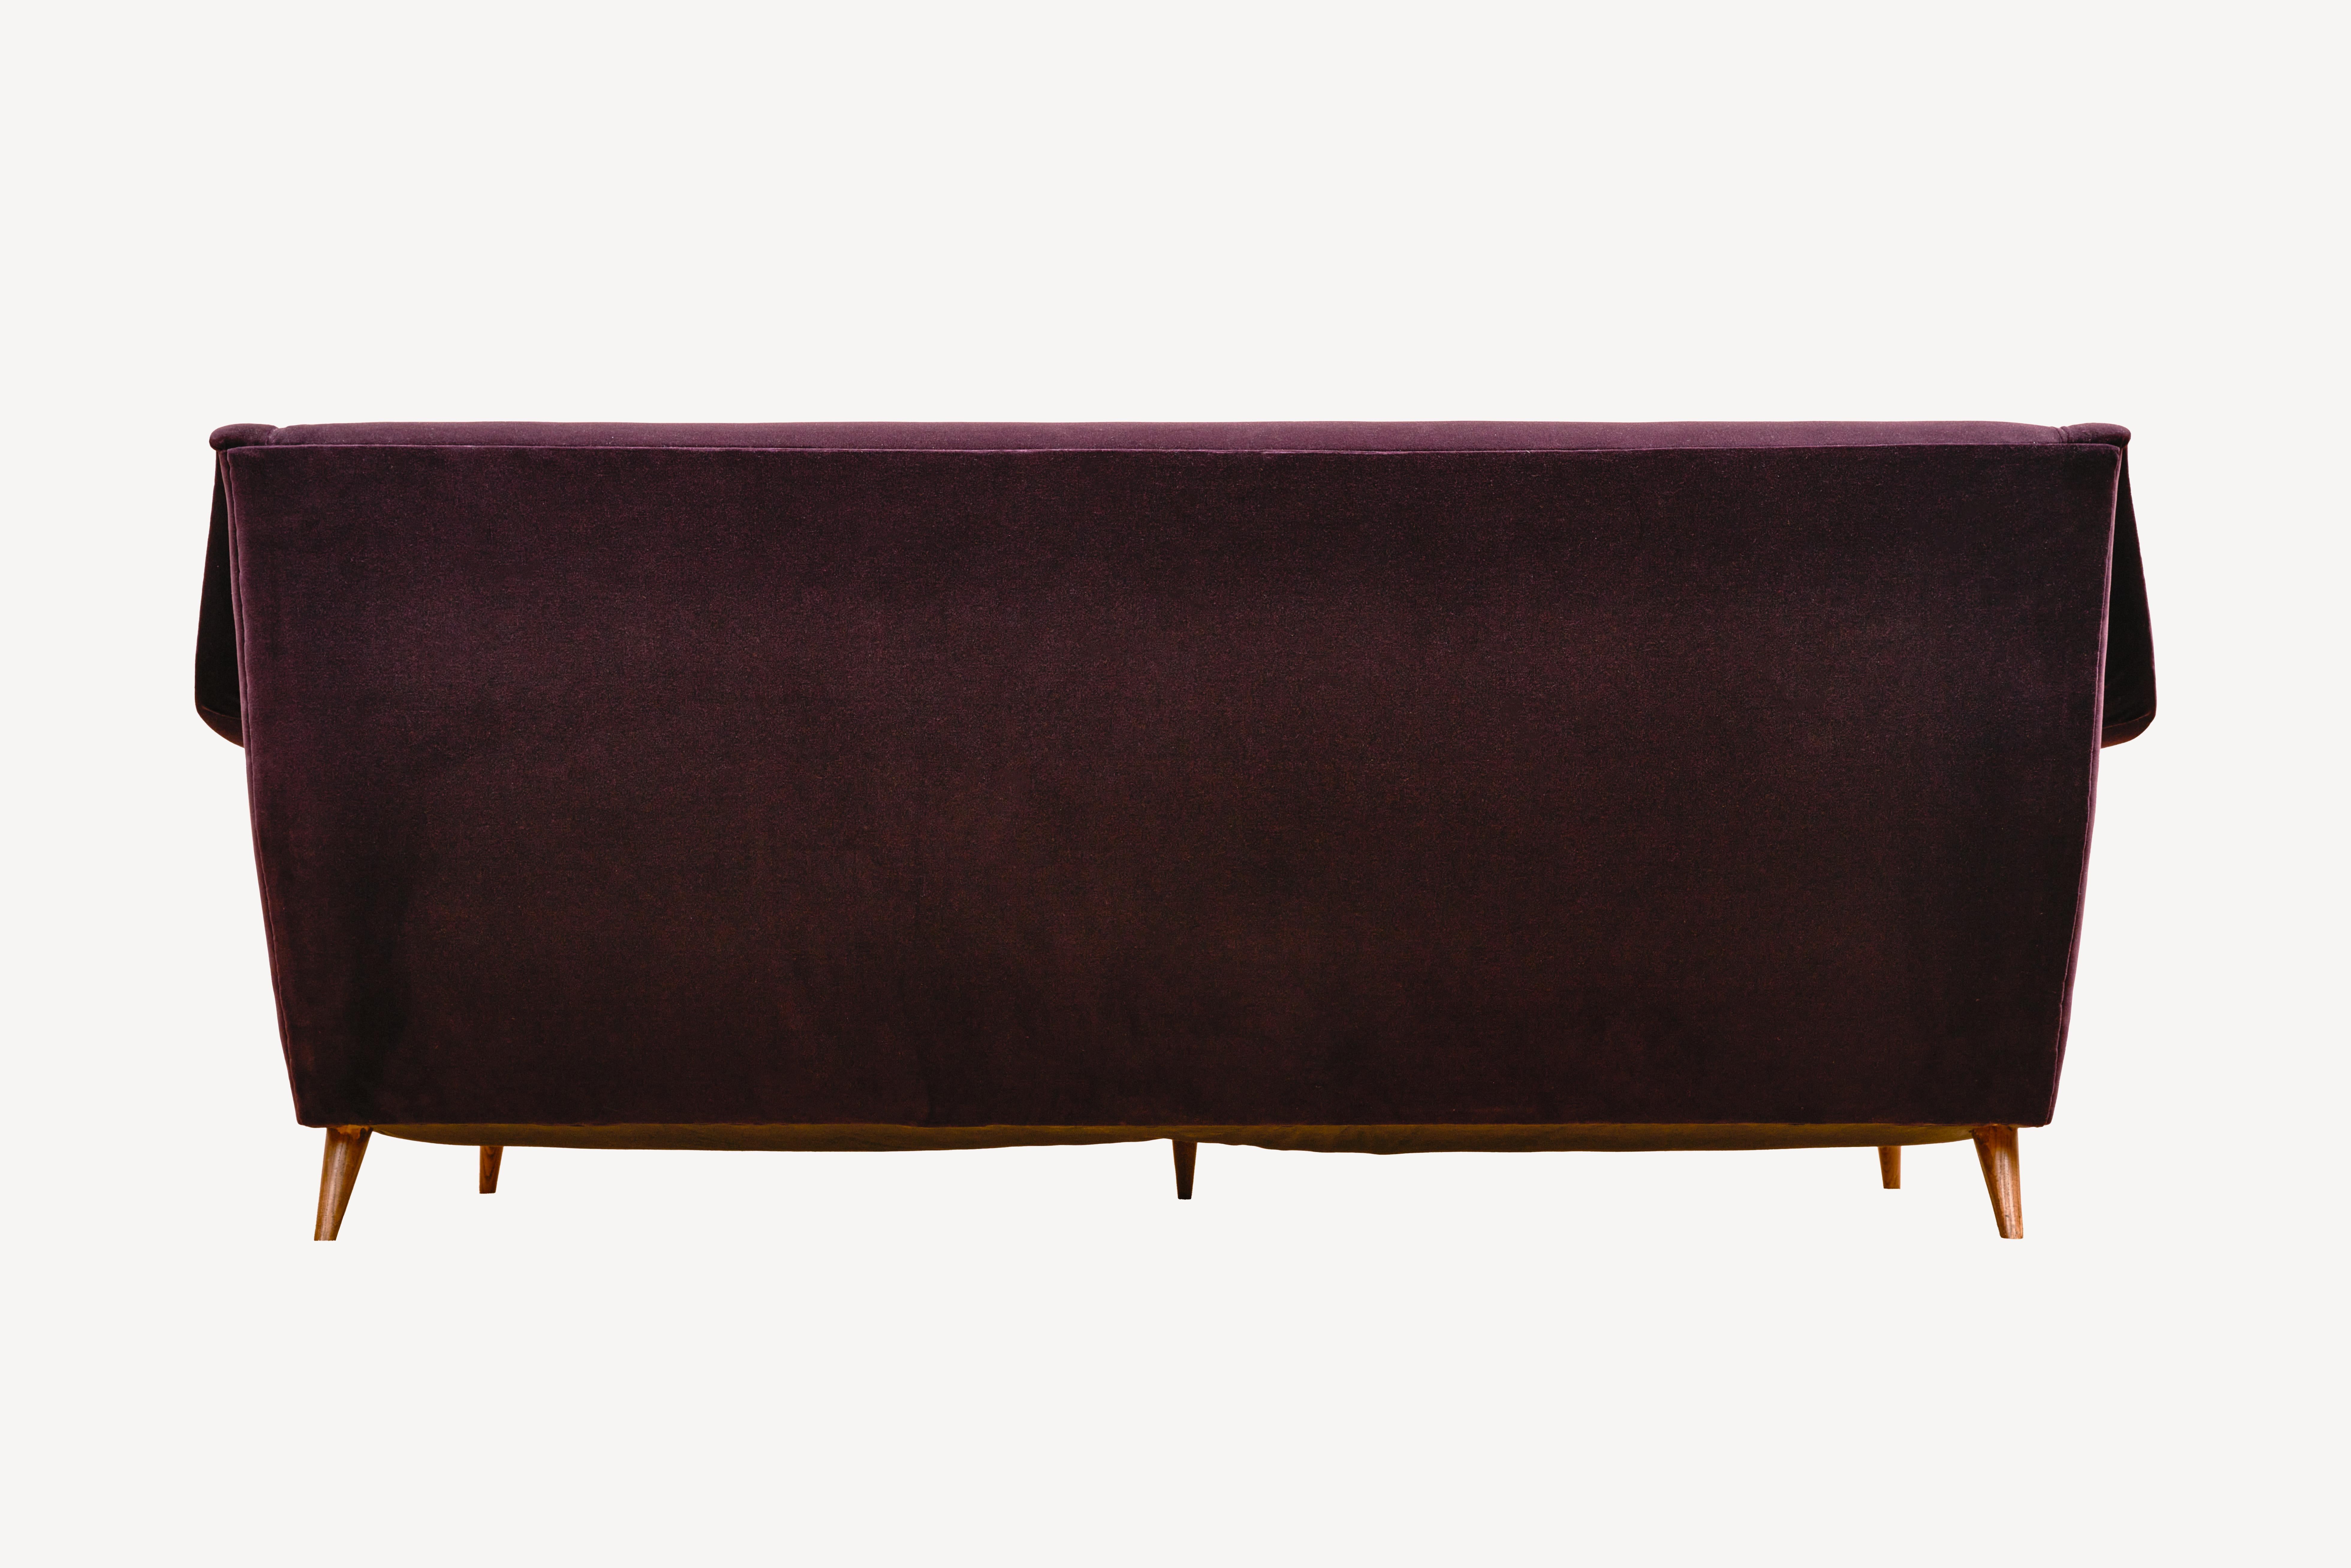 The Model 802 Sofa designed by Carlo de Carli is a stunning piece of mid-century modern furniture that is highly sought after by collectors and design enthusiasts. The sofa features a sleek and minimalist design, with clean lines and a low profile